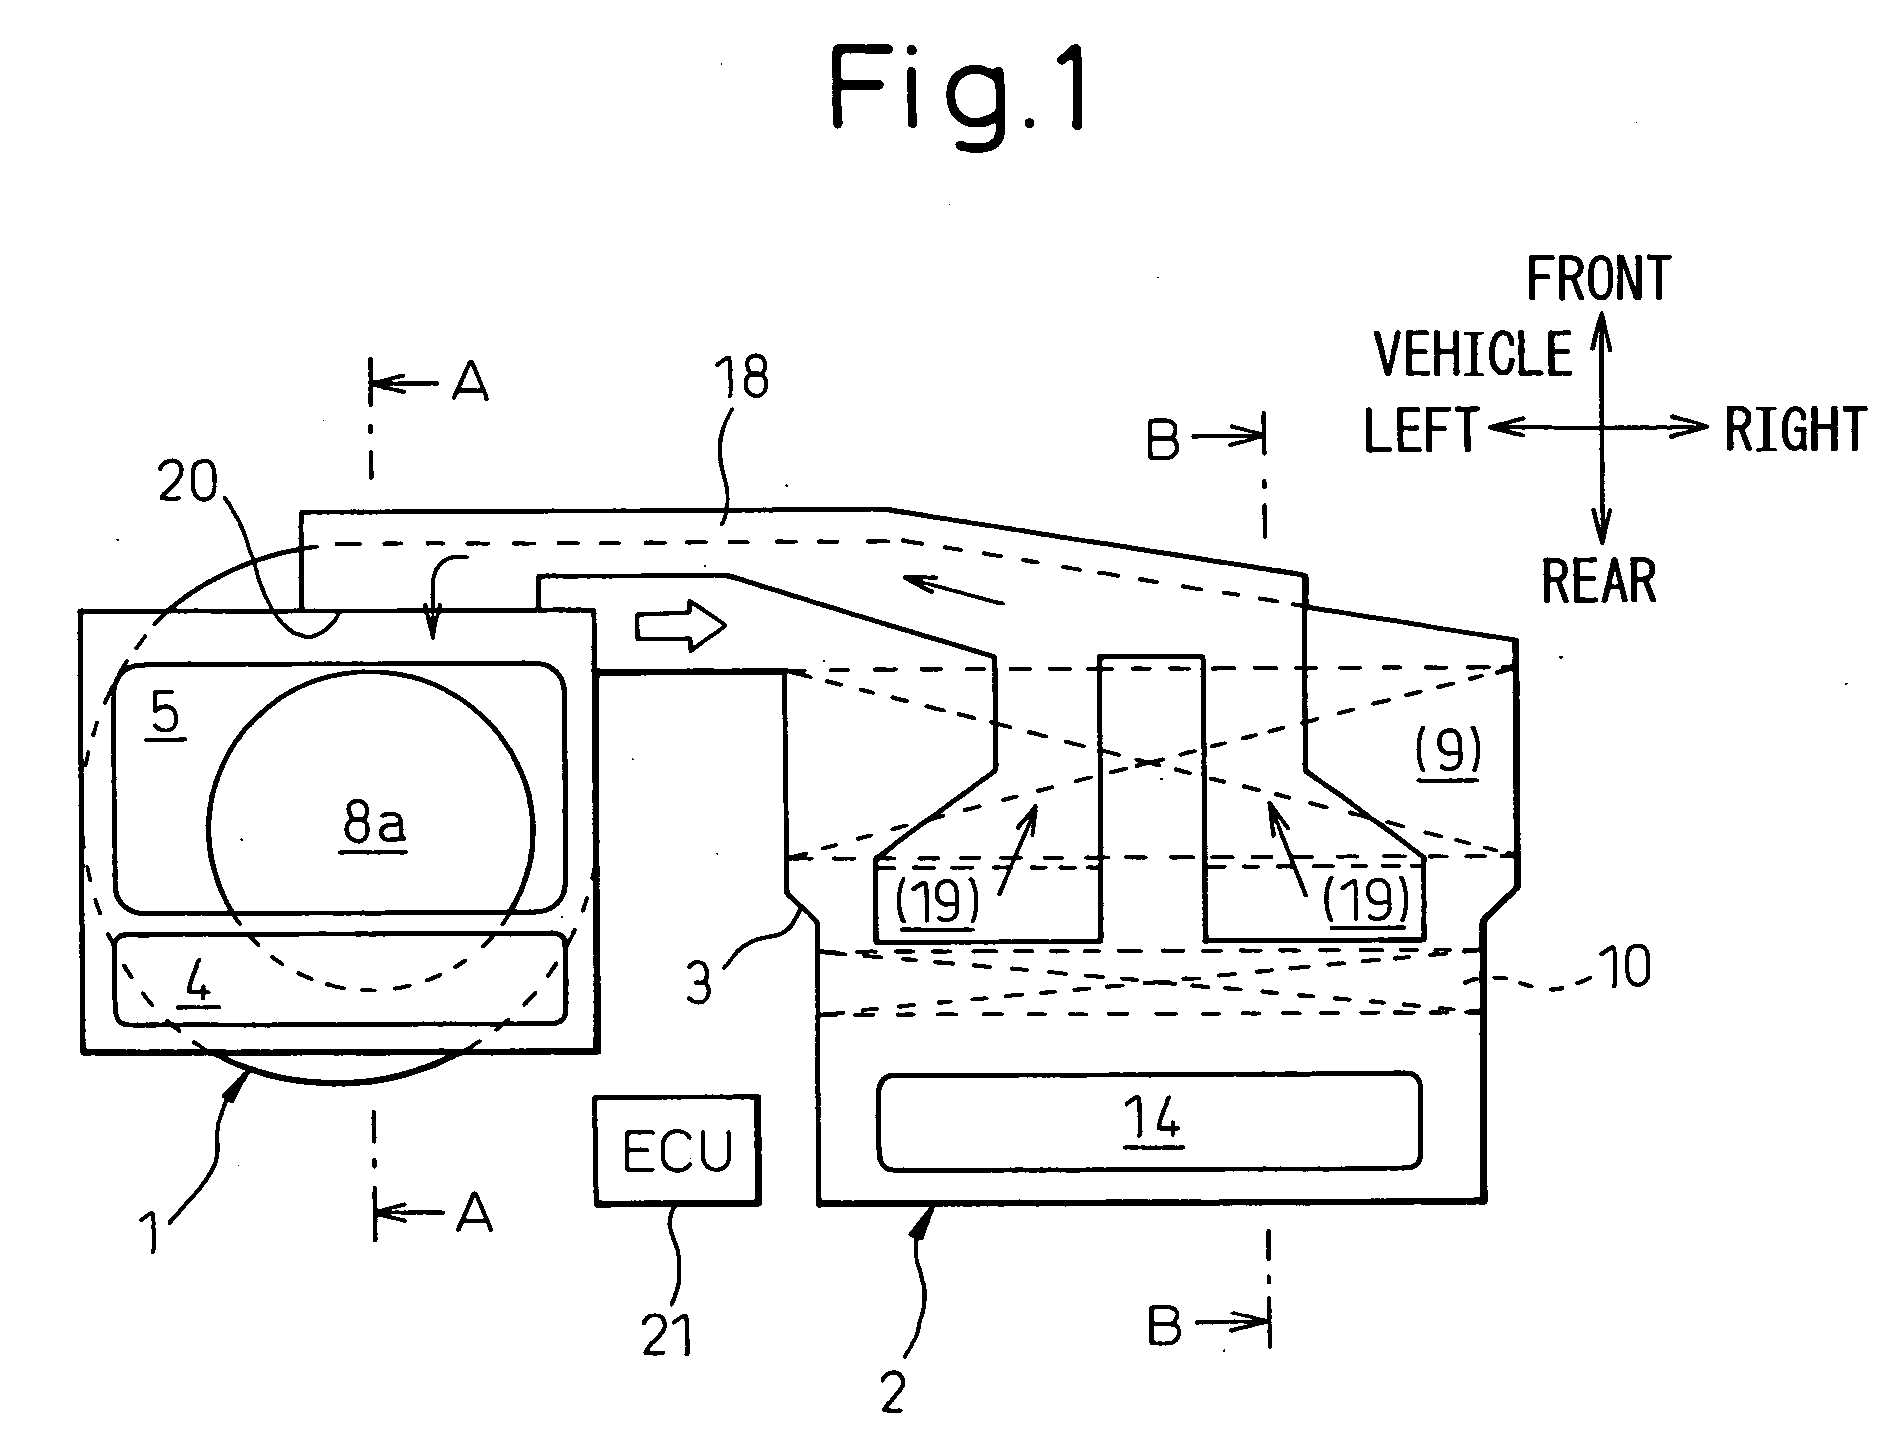 Air conditioner for vehicle capable of immediately cooling vehicle compartment